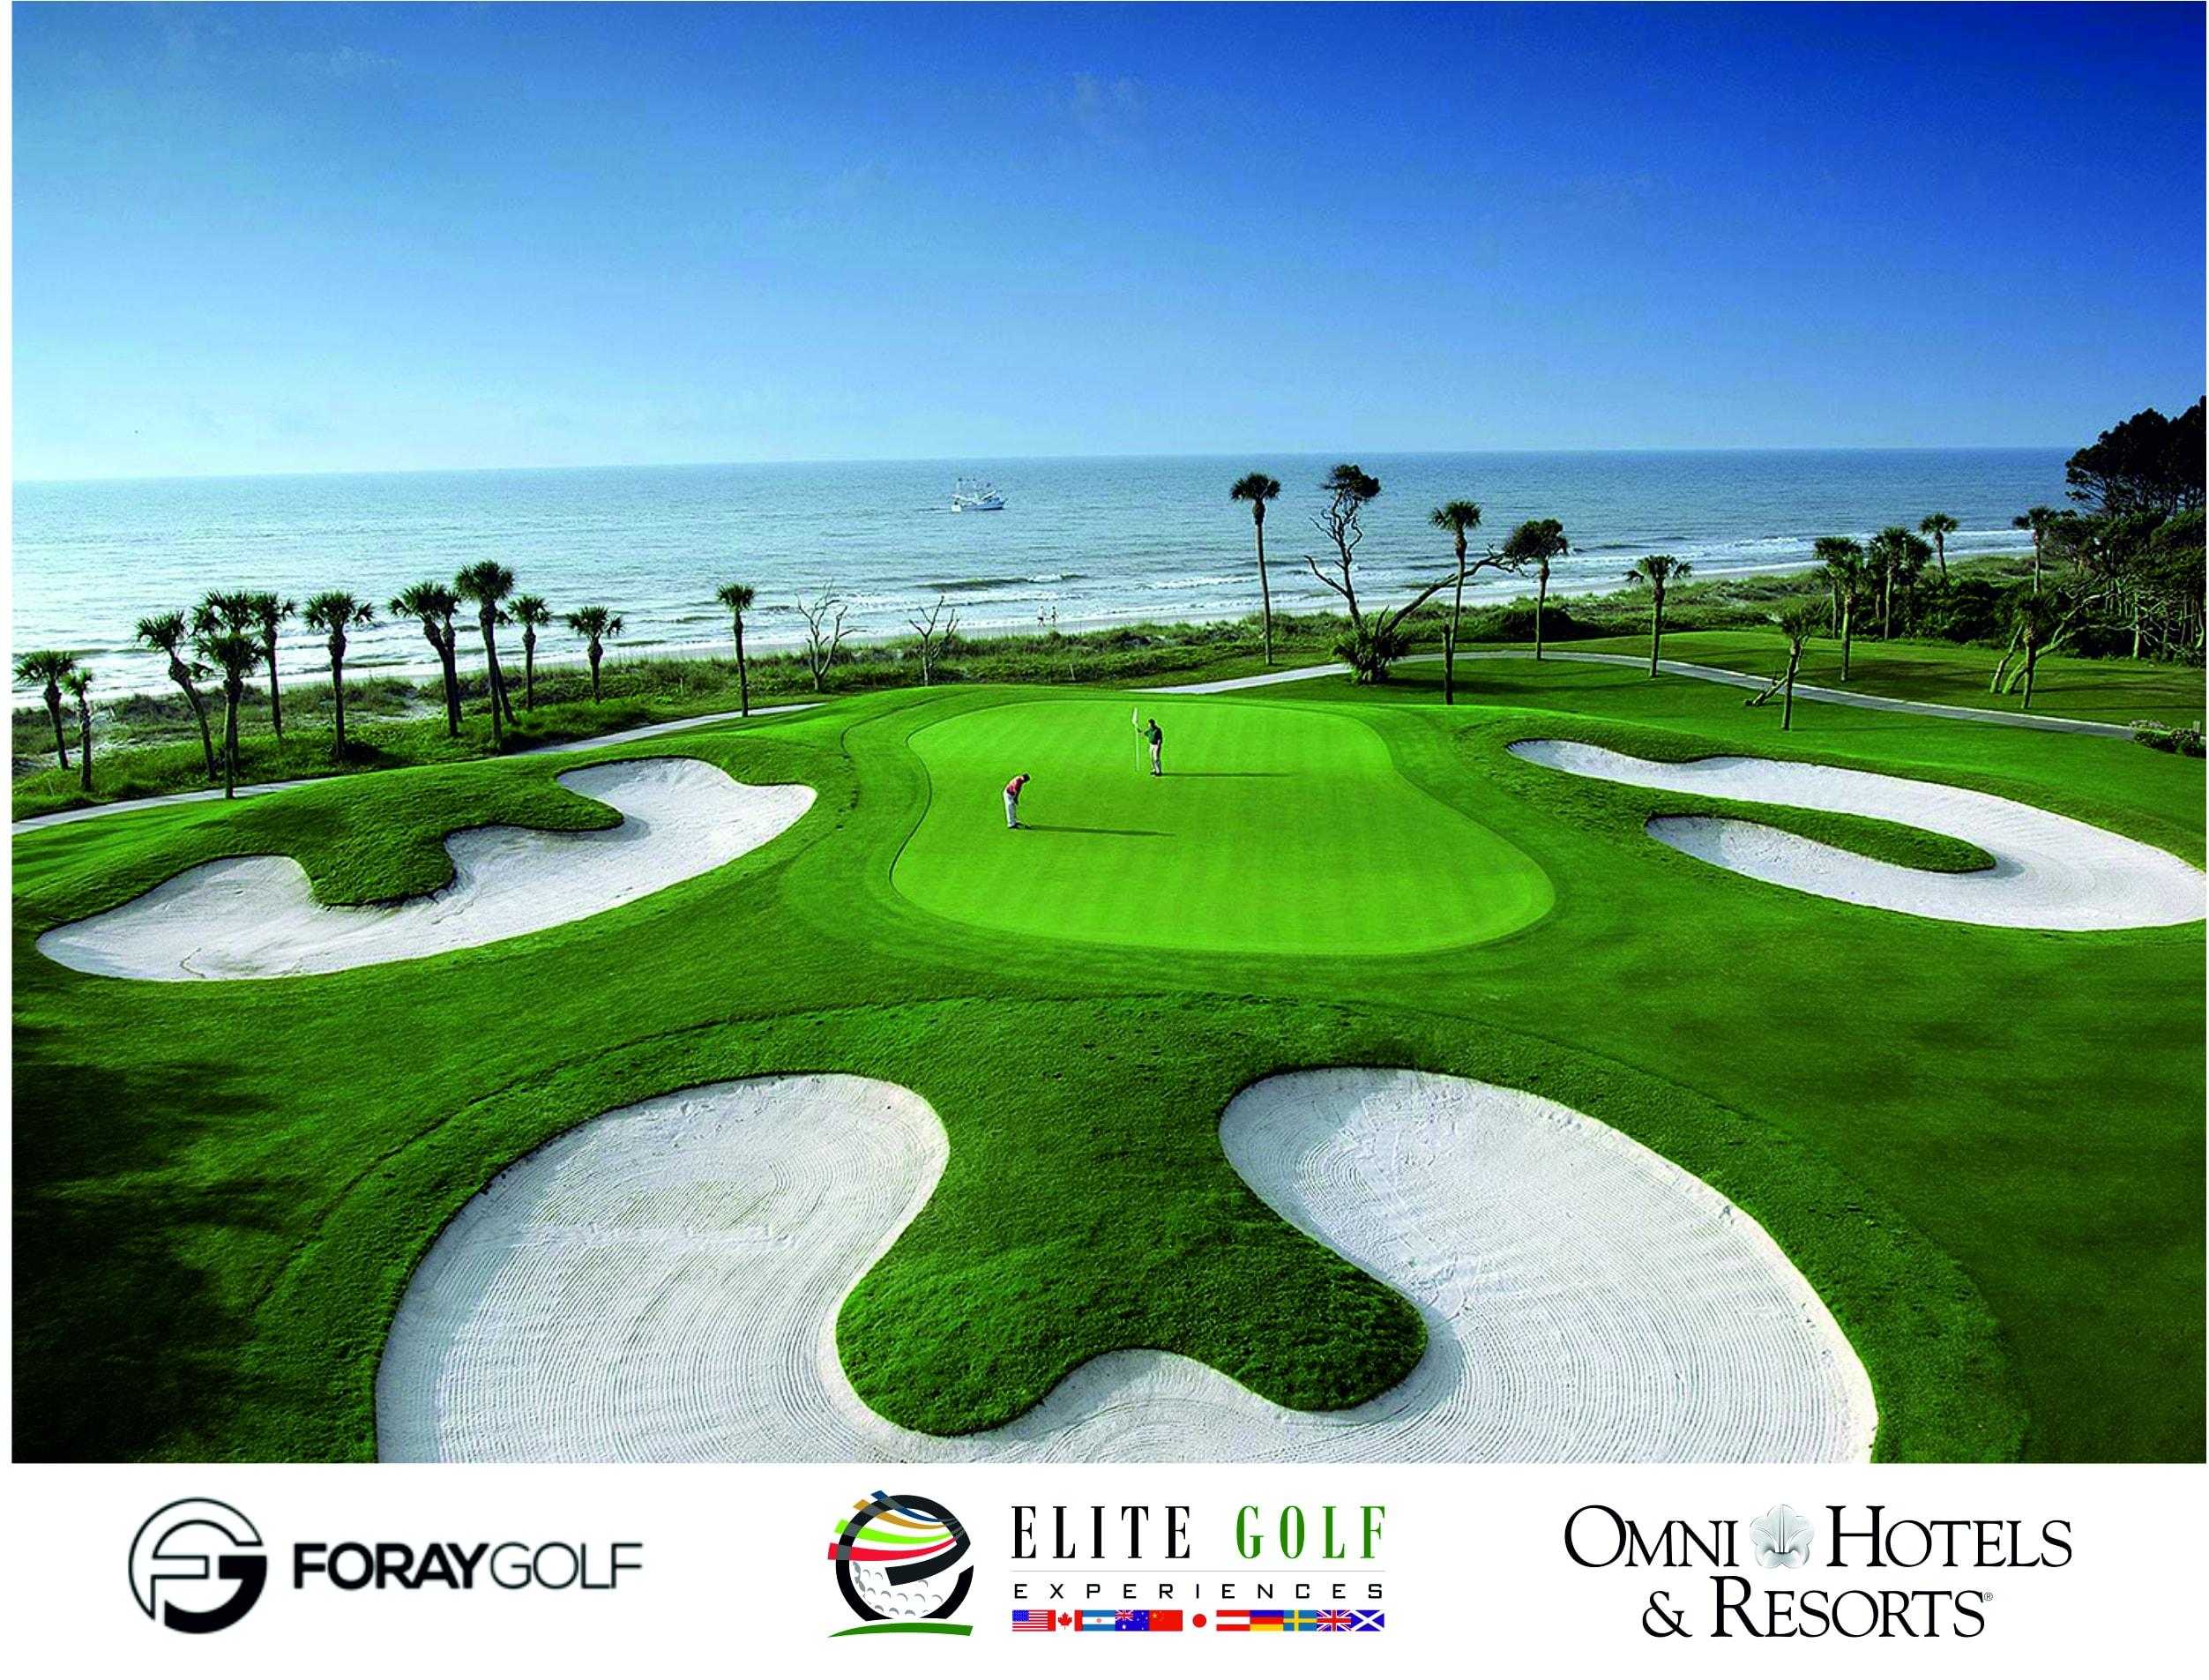 Win a Hilton Head Golf Vacation For 2 People!